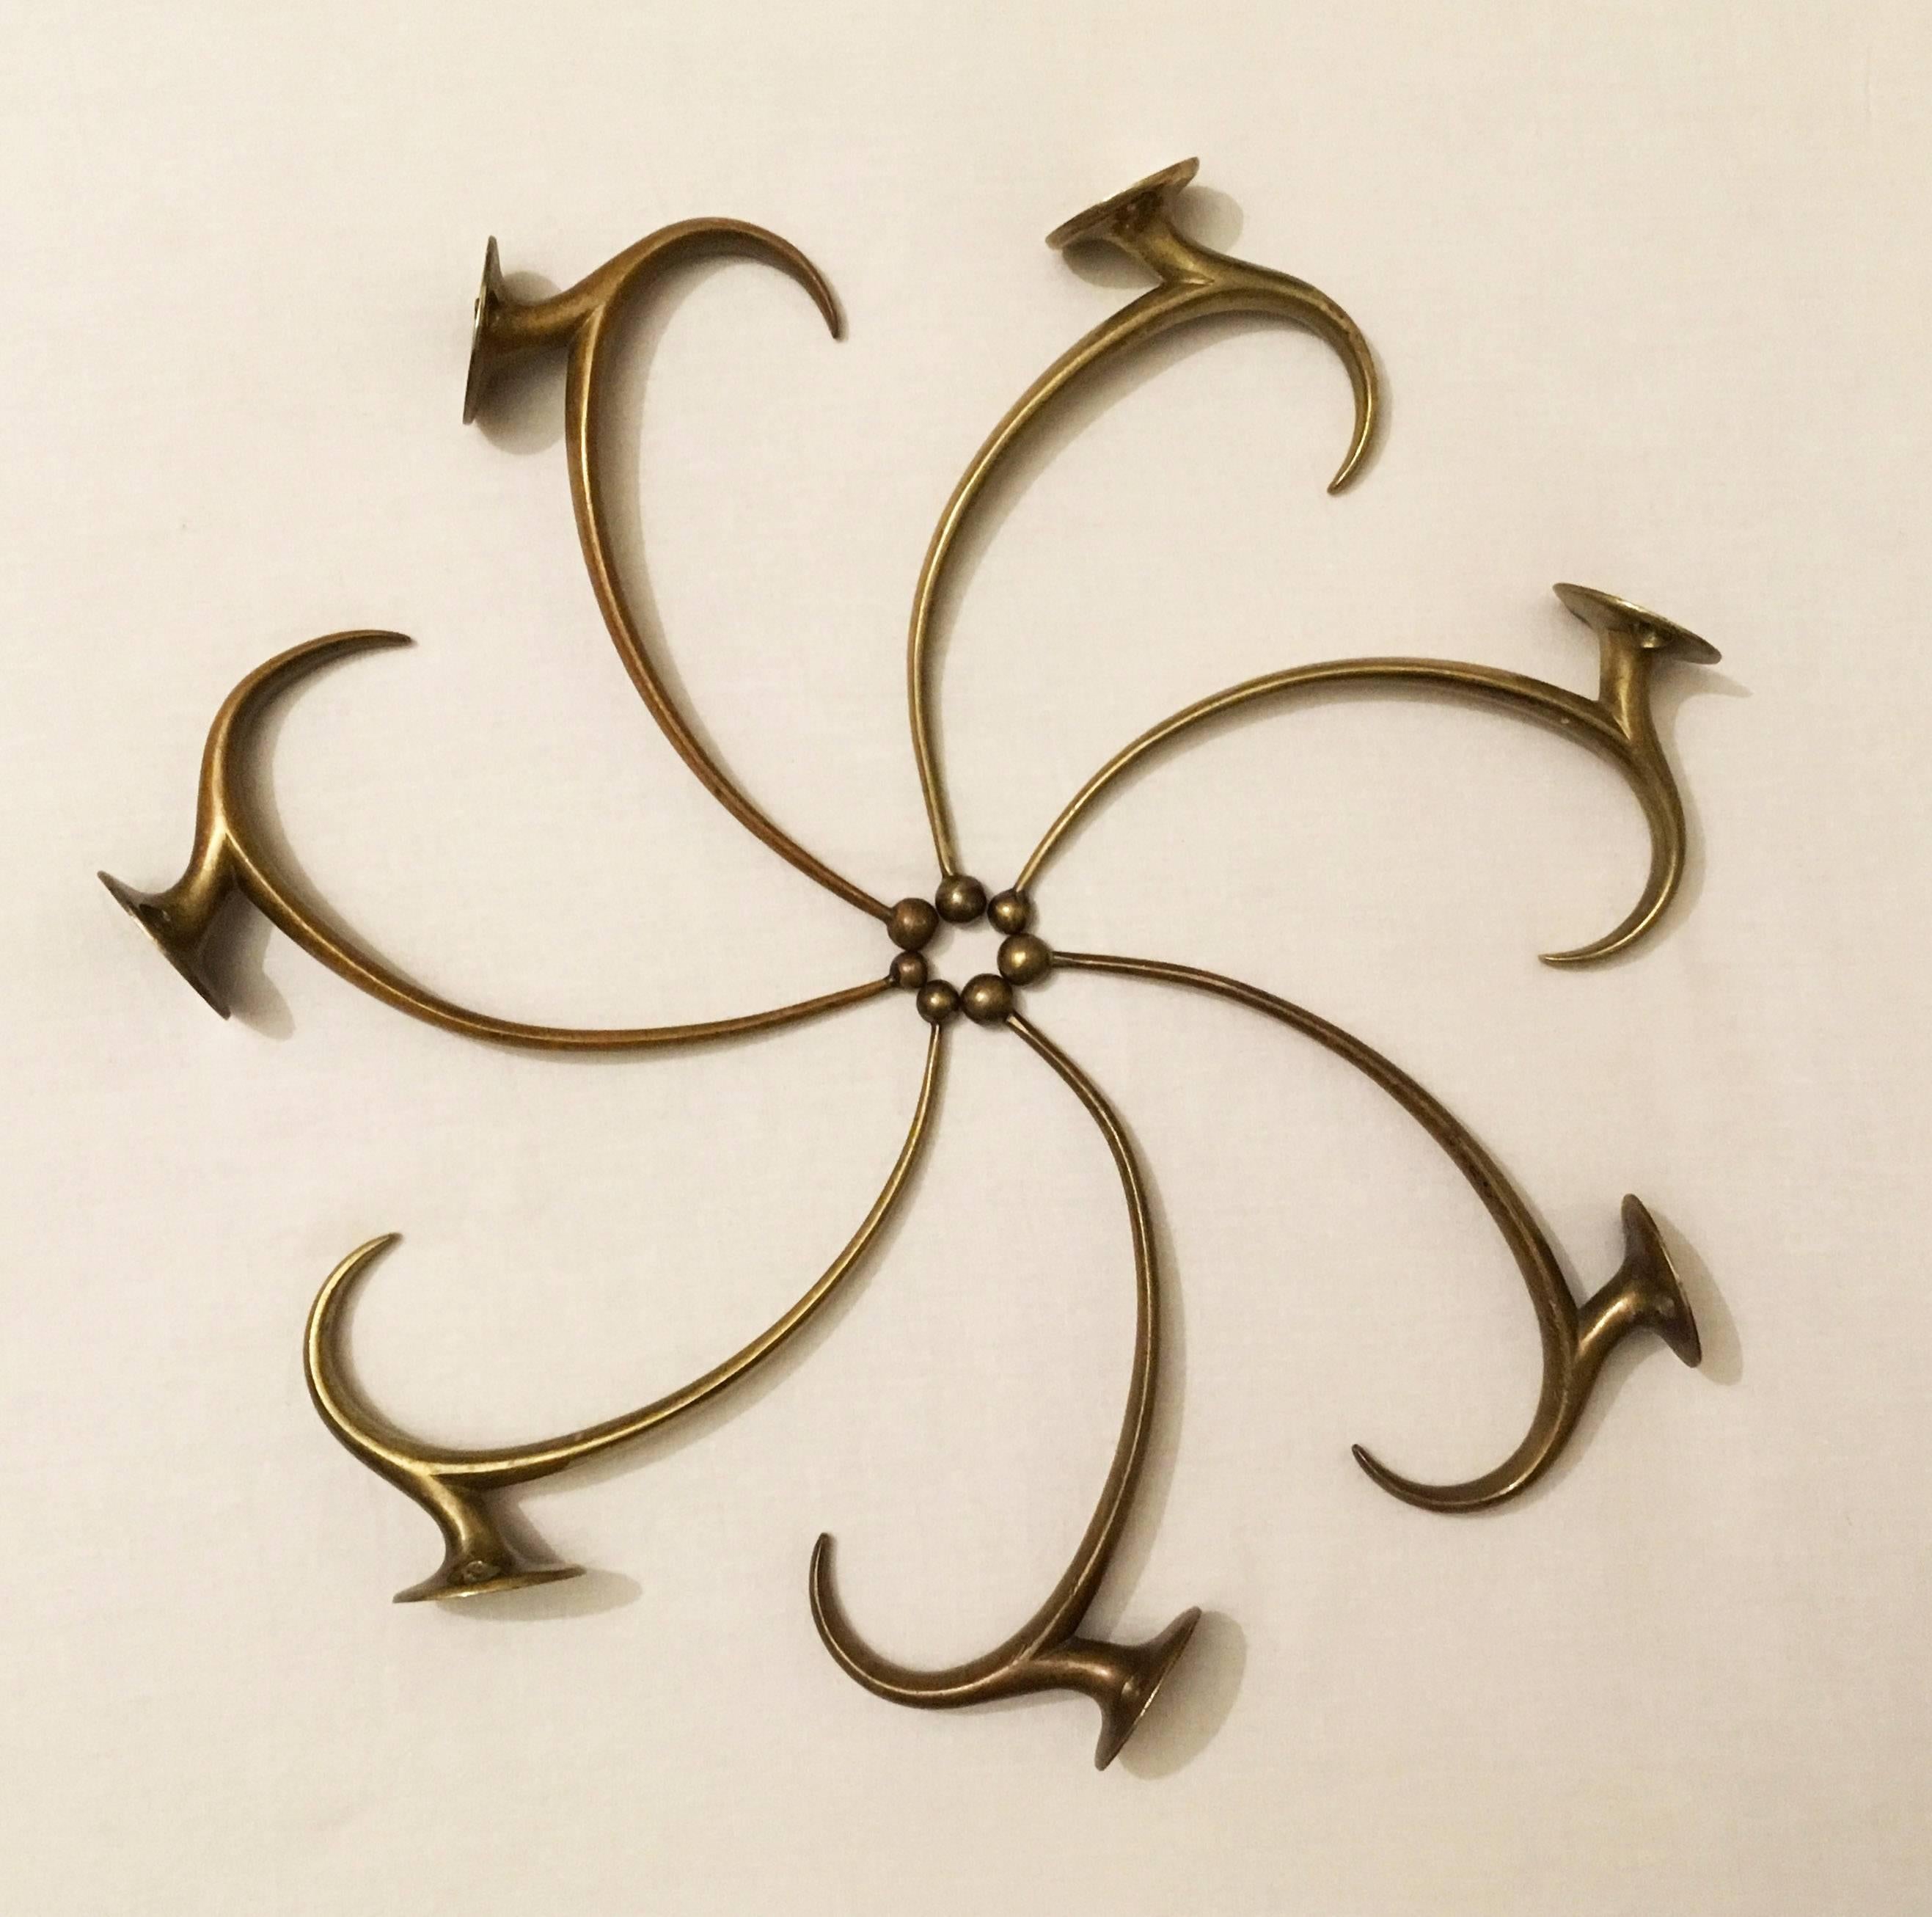 Cast brass wall hooks by Franz Hagenauer Wien made in the early 1950s.
Up to seven available, price/piece